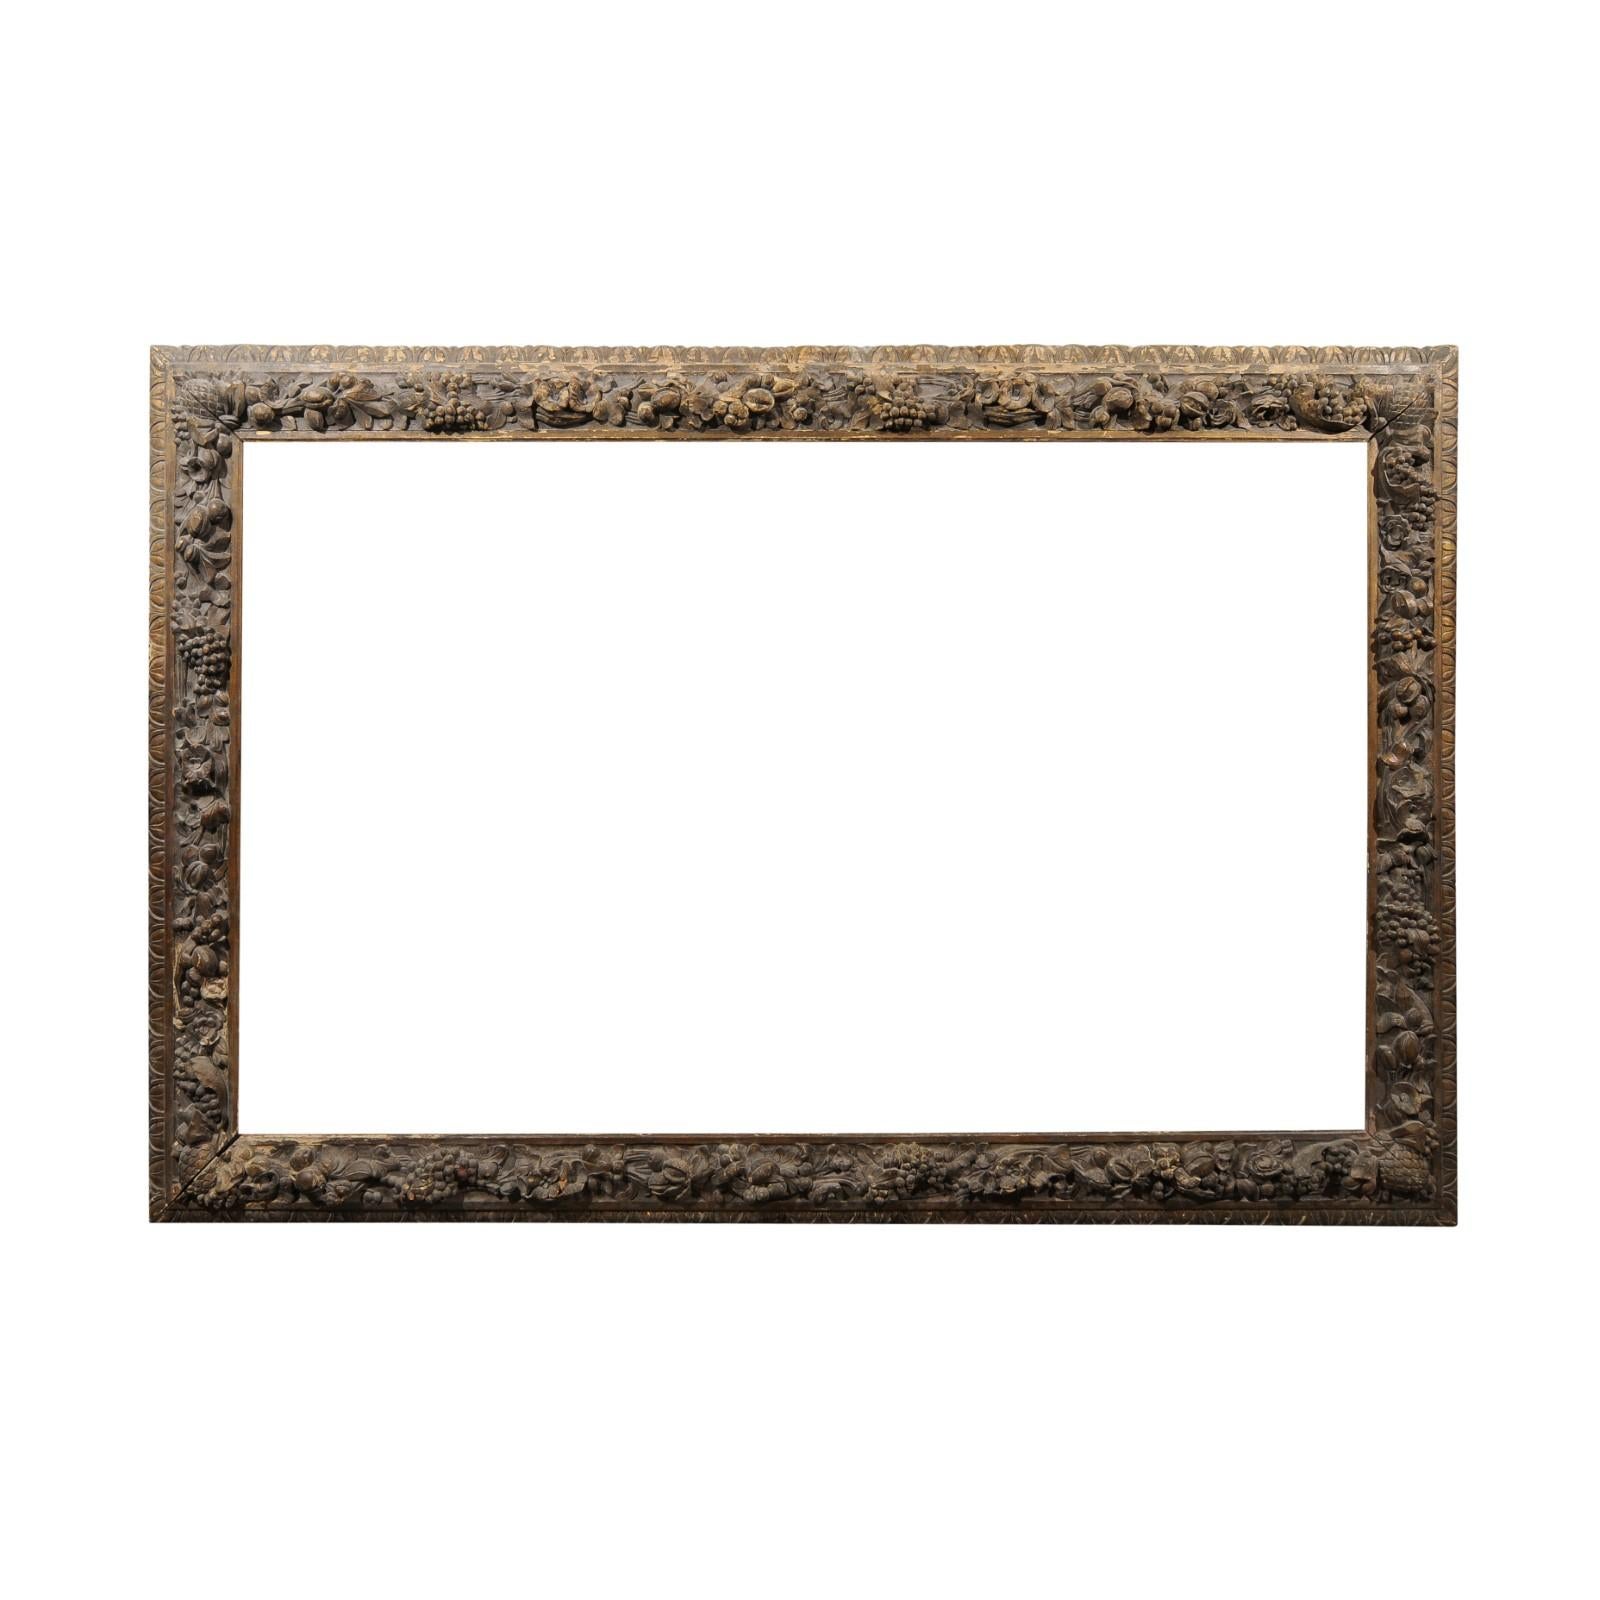 Large Carved Giltwood Frame with Flower Detail, 19th Century France